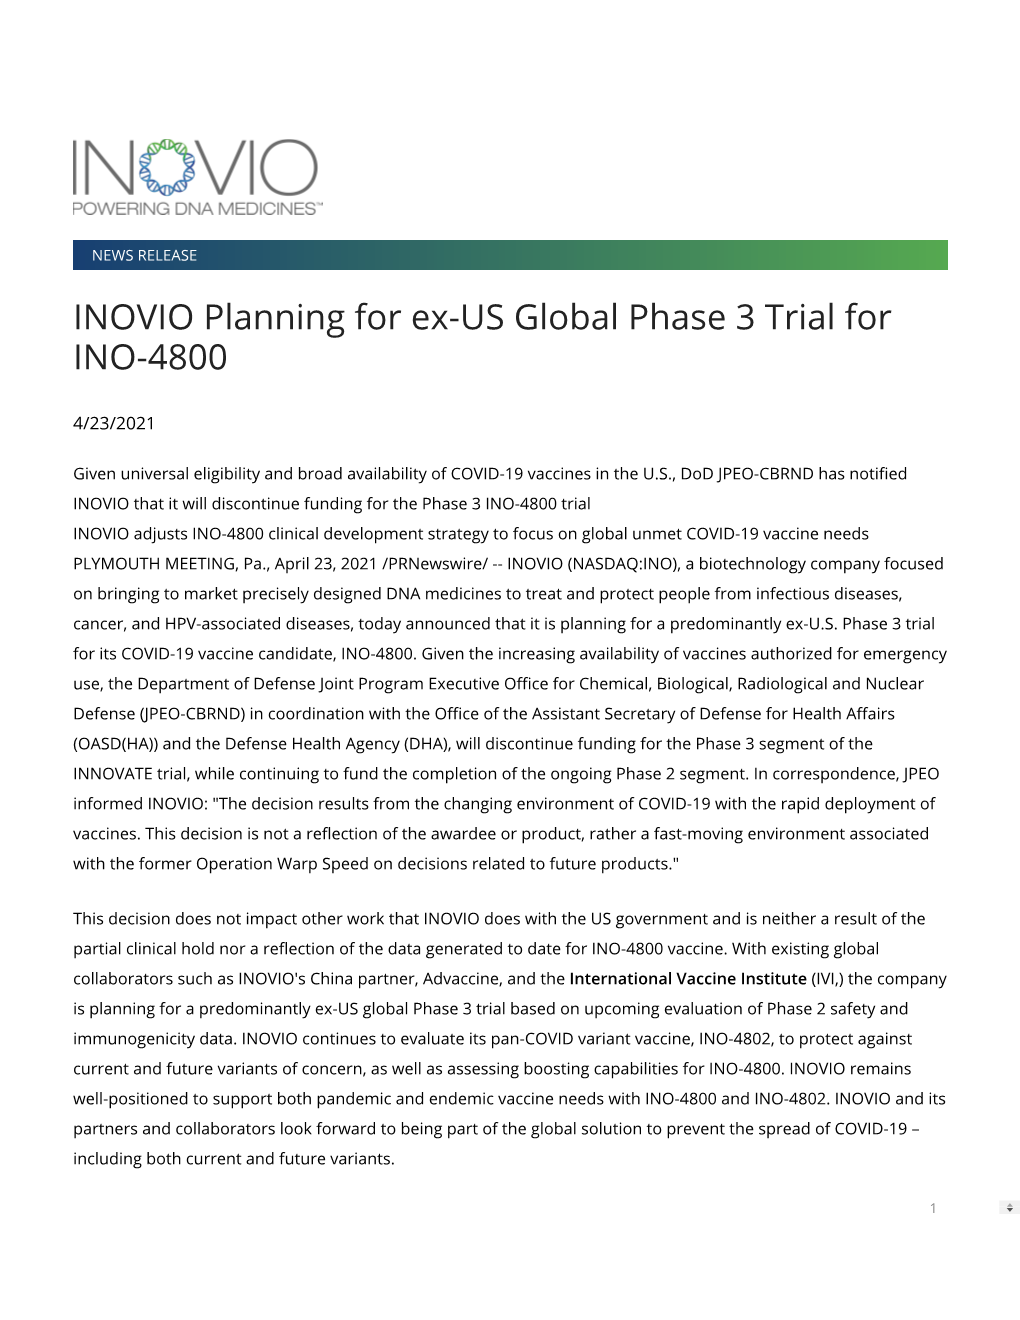 INOVIO Planning for Ex-US Global Phase 3 Trial for INO-4800